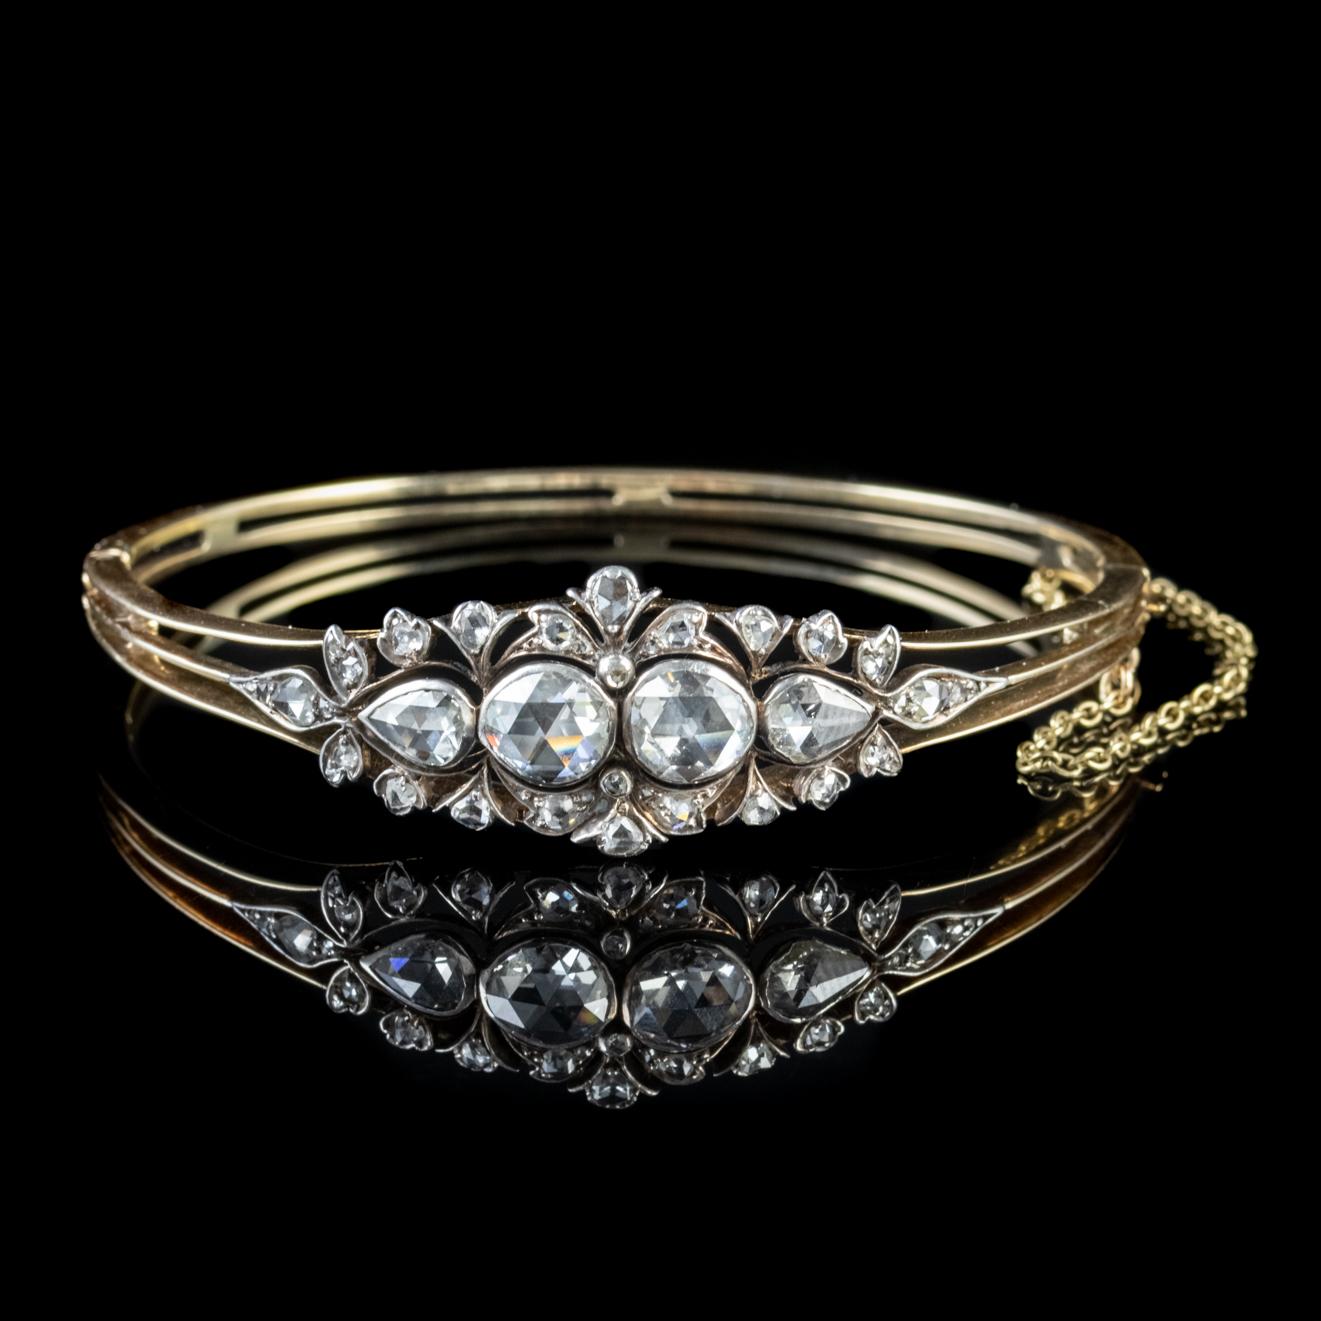 This striking antique Victorian bangle is adorned with a stunning array of Rose cut Diamonds spread out across the decorative face totalling to approx. 4ct with the largest stones weighing around 1.25ct each.   

The rose cut Diamonds resemble the